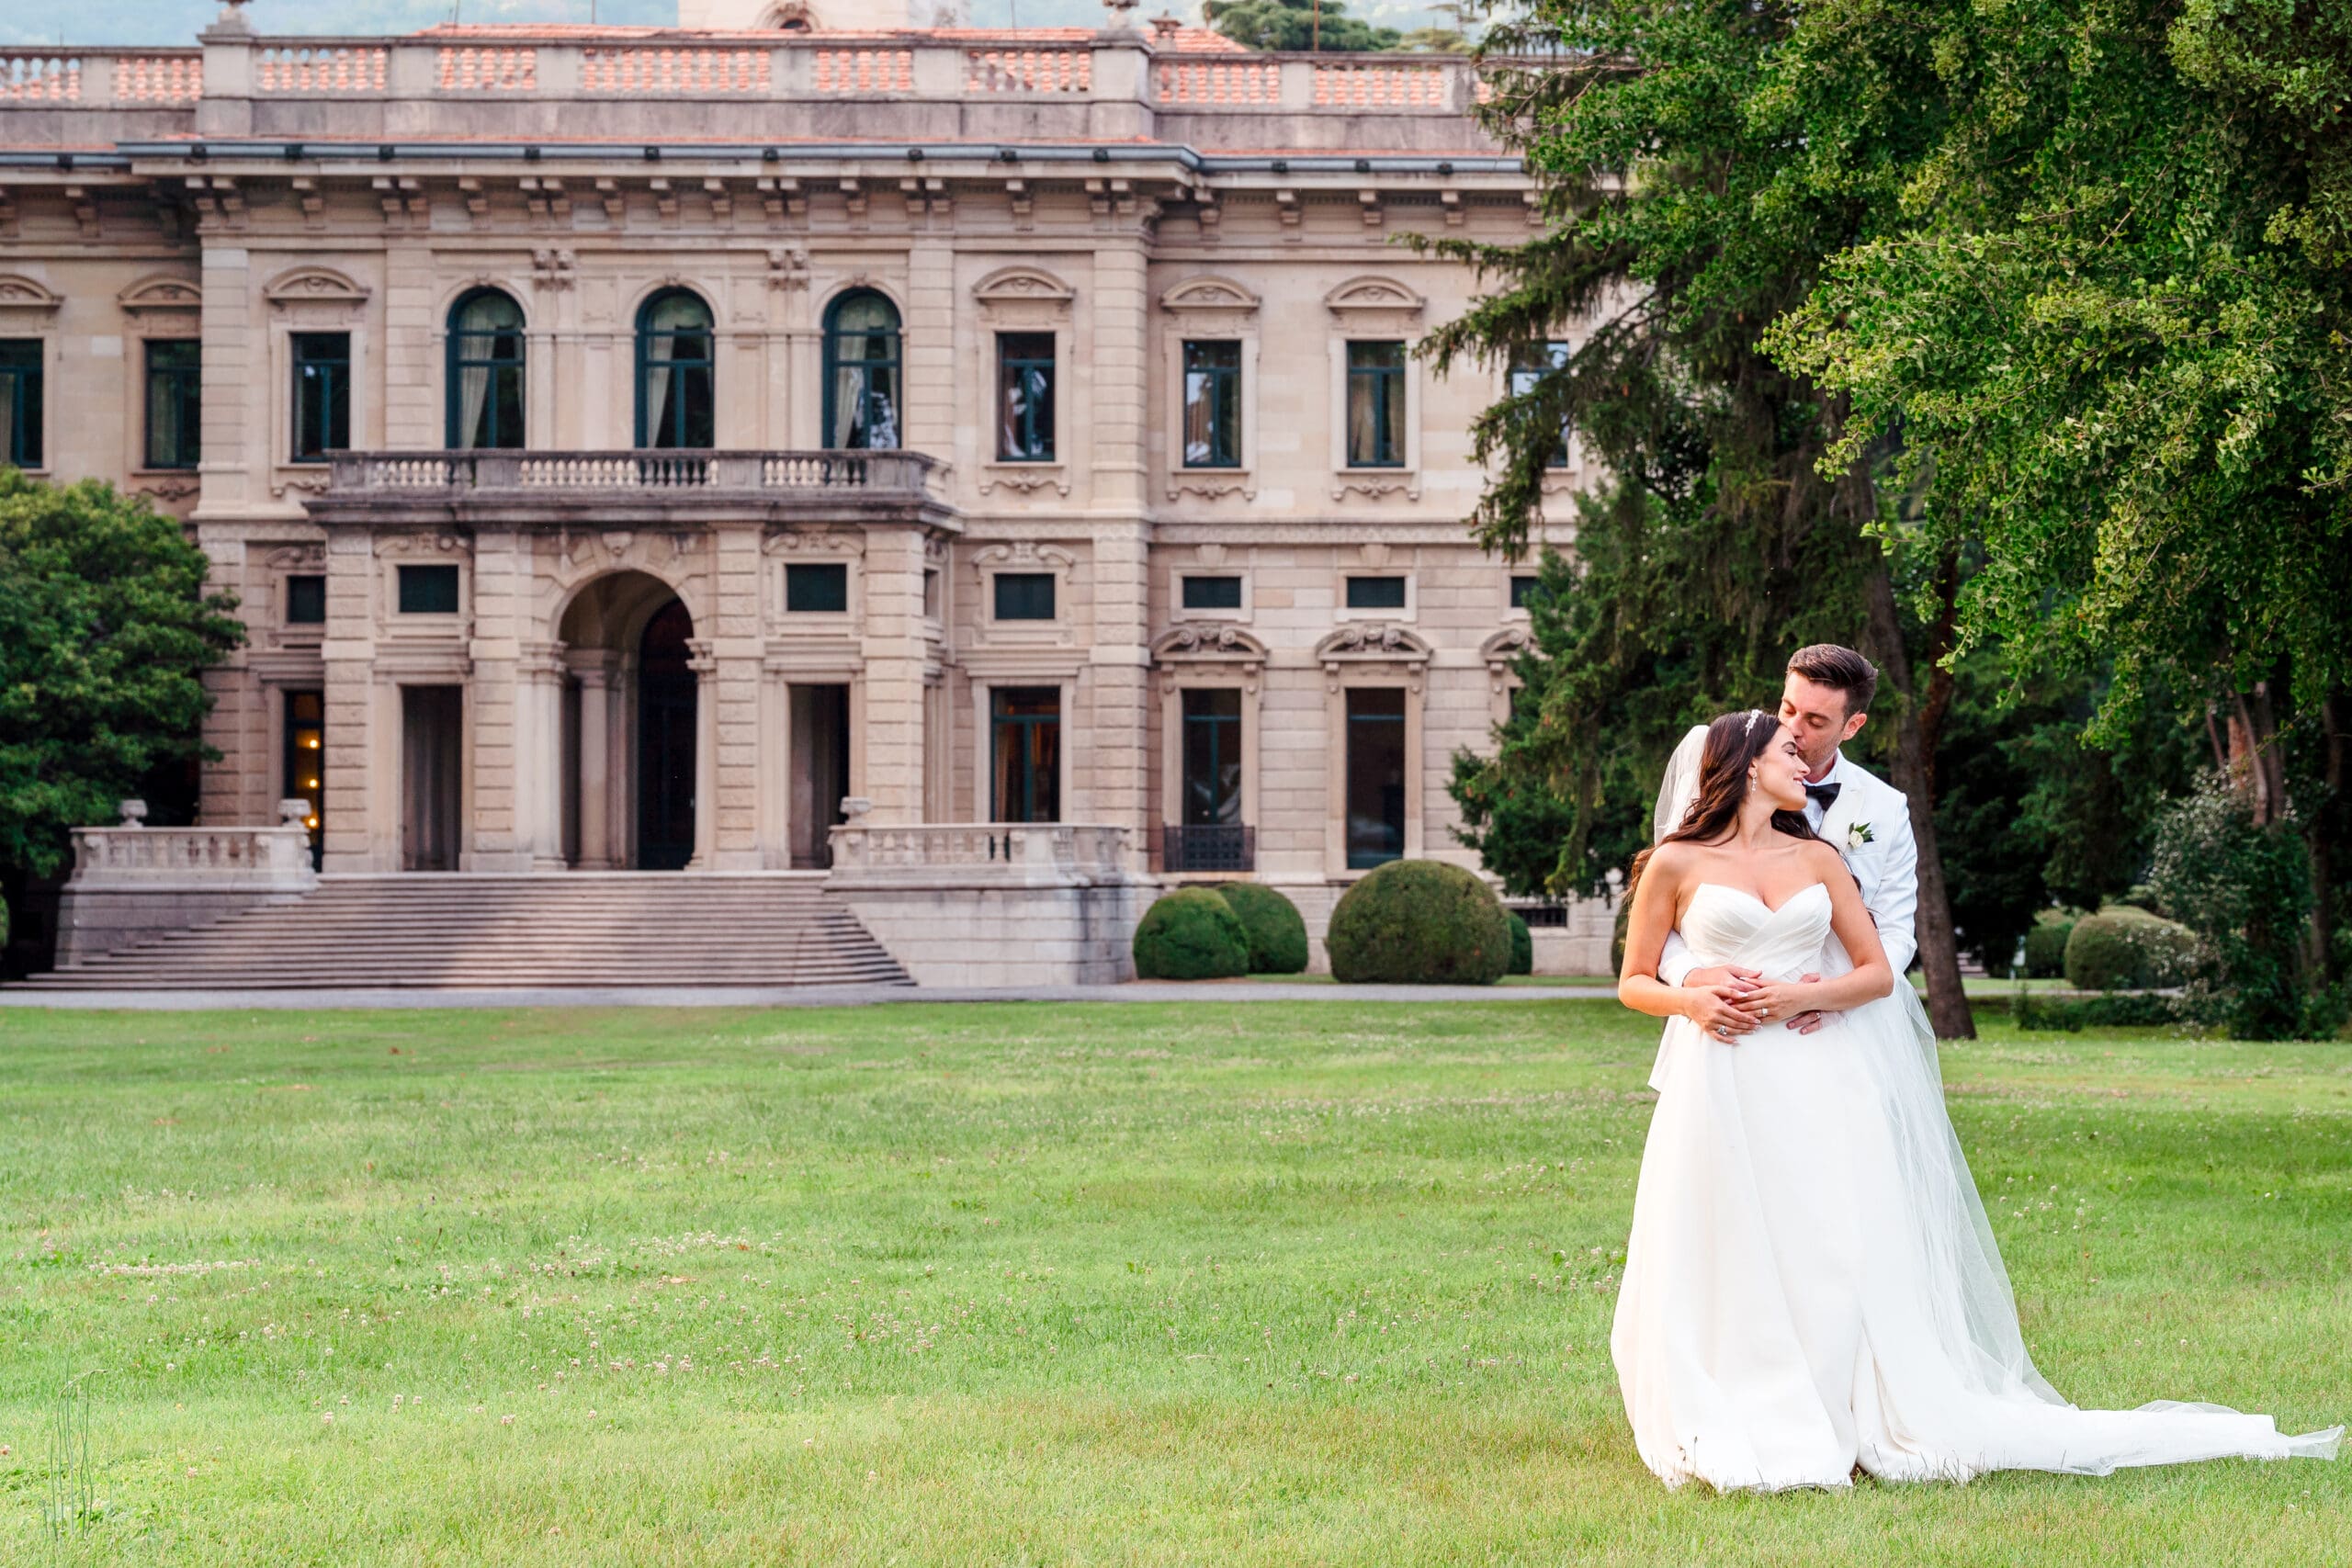 Captivating destination wedding moment: Couple stands in front of the mansion at Lake Como wedding in Italy, with Villa Erba in the background, creating a picturesque scene filled with elegance and romance.